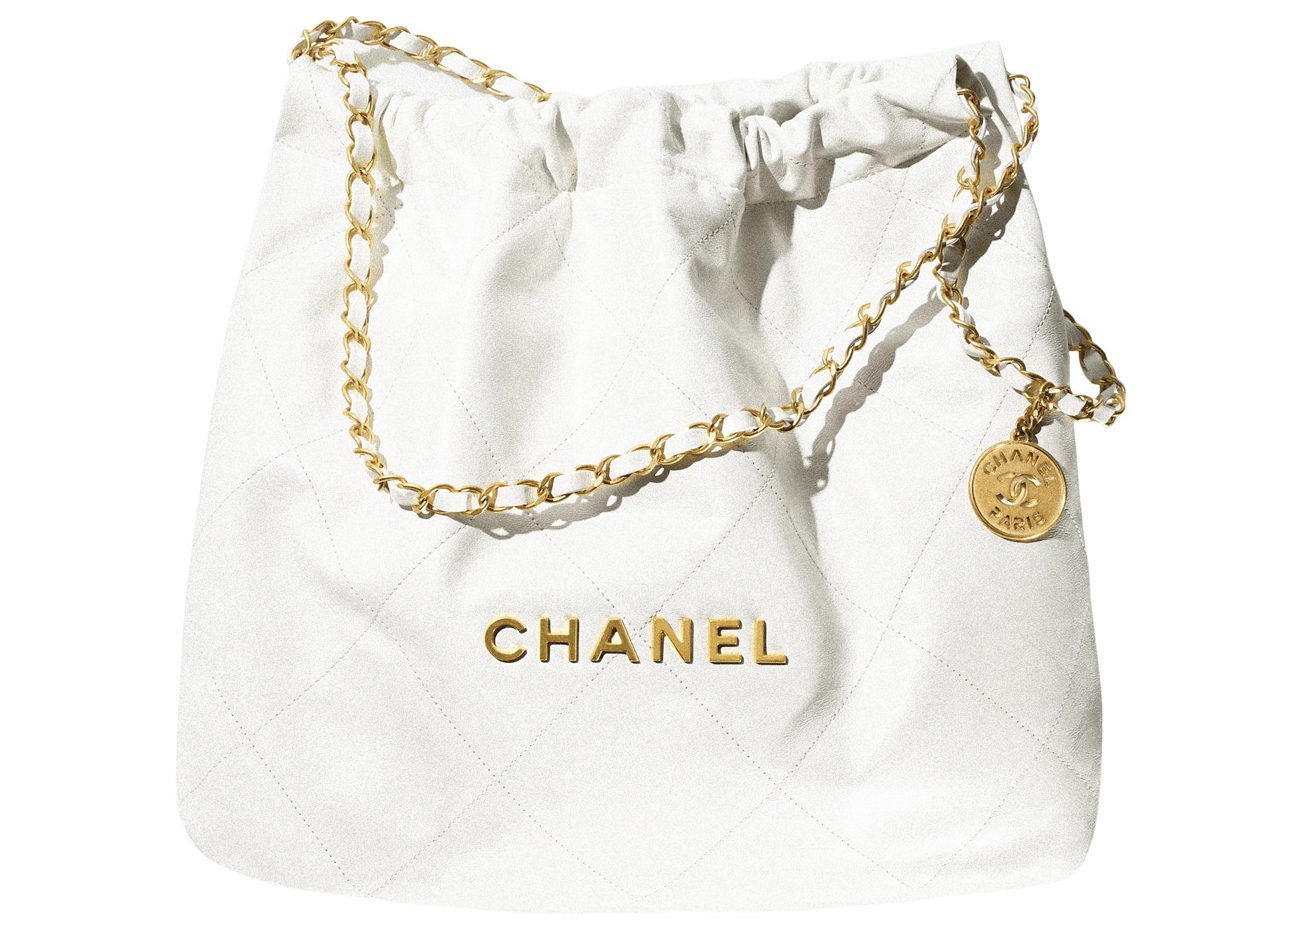 70 Chanel Bag Stock Photos Pictures  RoyaltyFree Images  iStock  Coco  chanel Louis vuitton Chanel couture